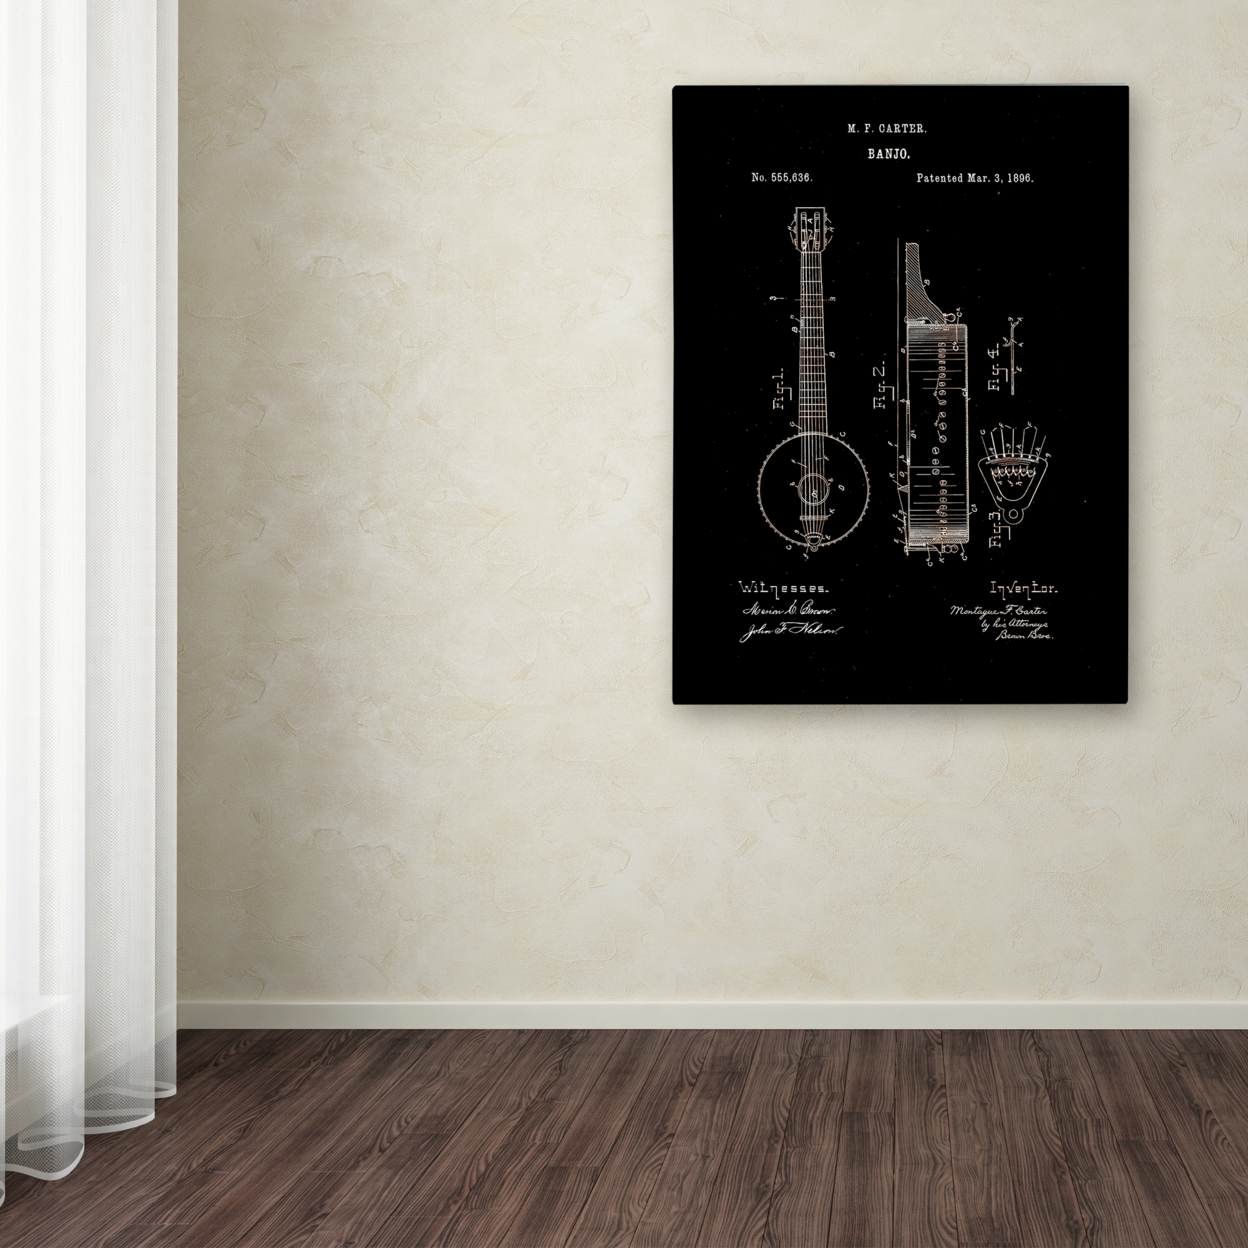 Claire Doherty 'Vintage Banjo Patent 1896 Black' Canvas Wall Art 35 X 47 Inches